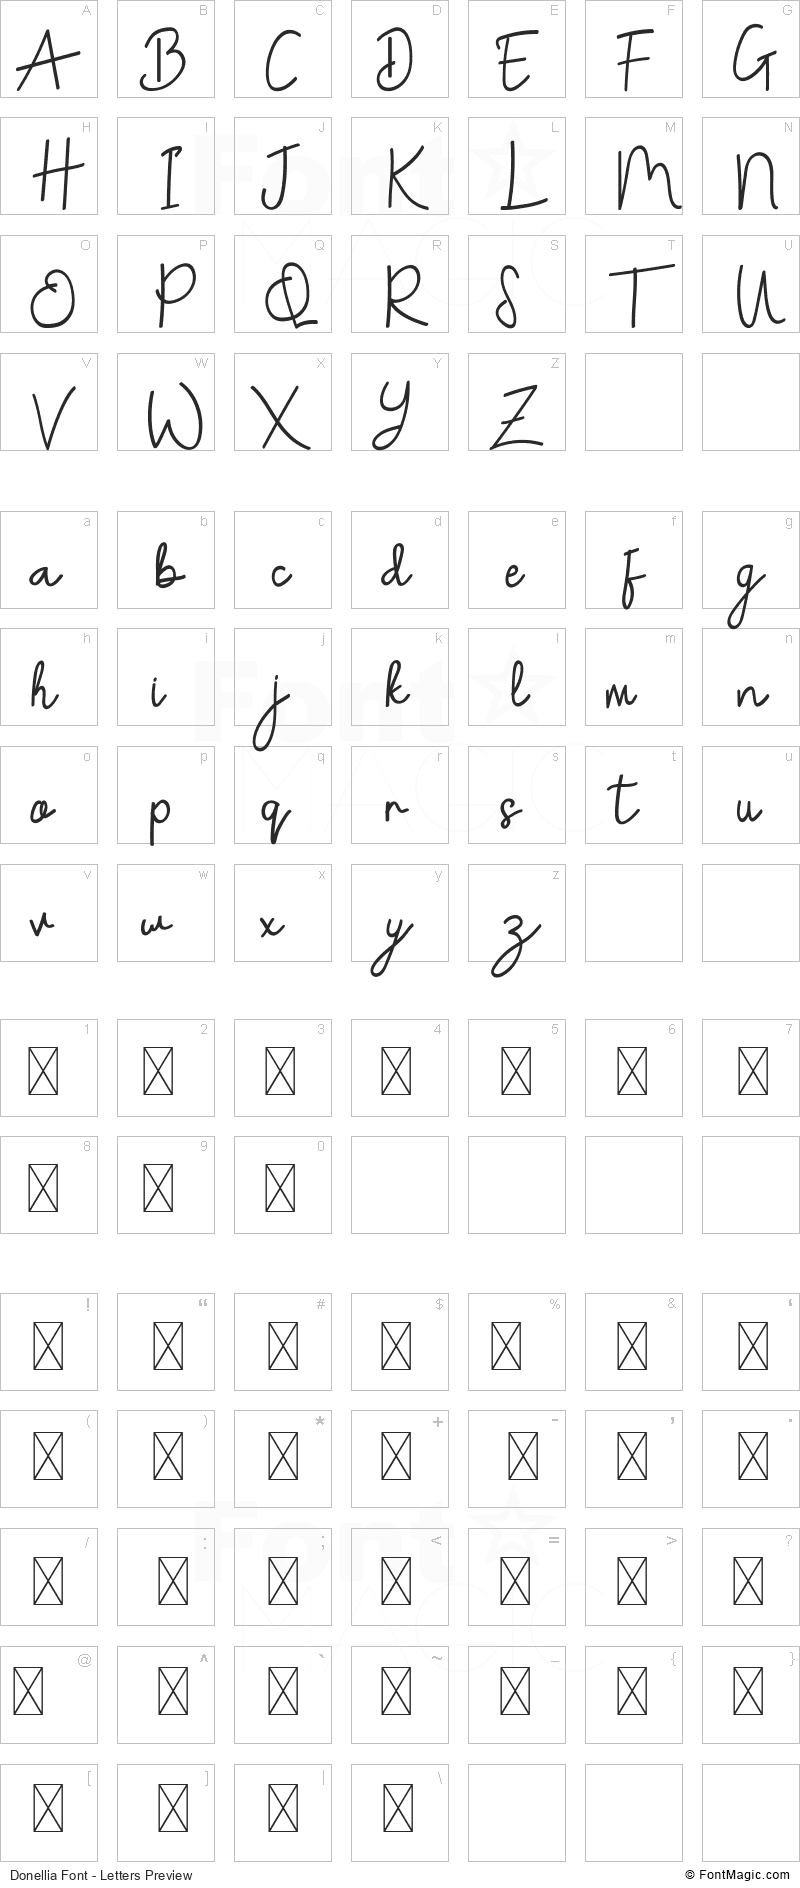 Donellia Font - All Latters Preview Chart